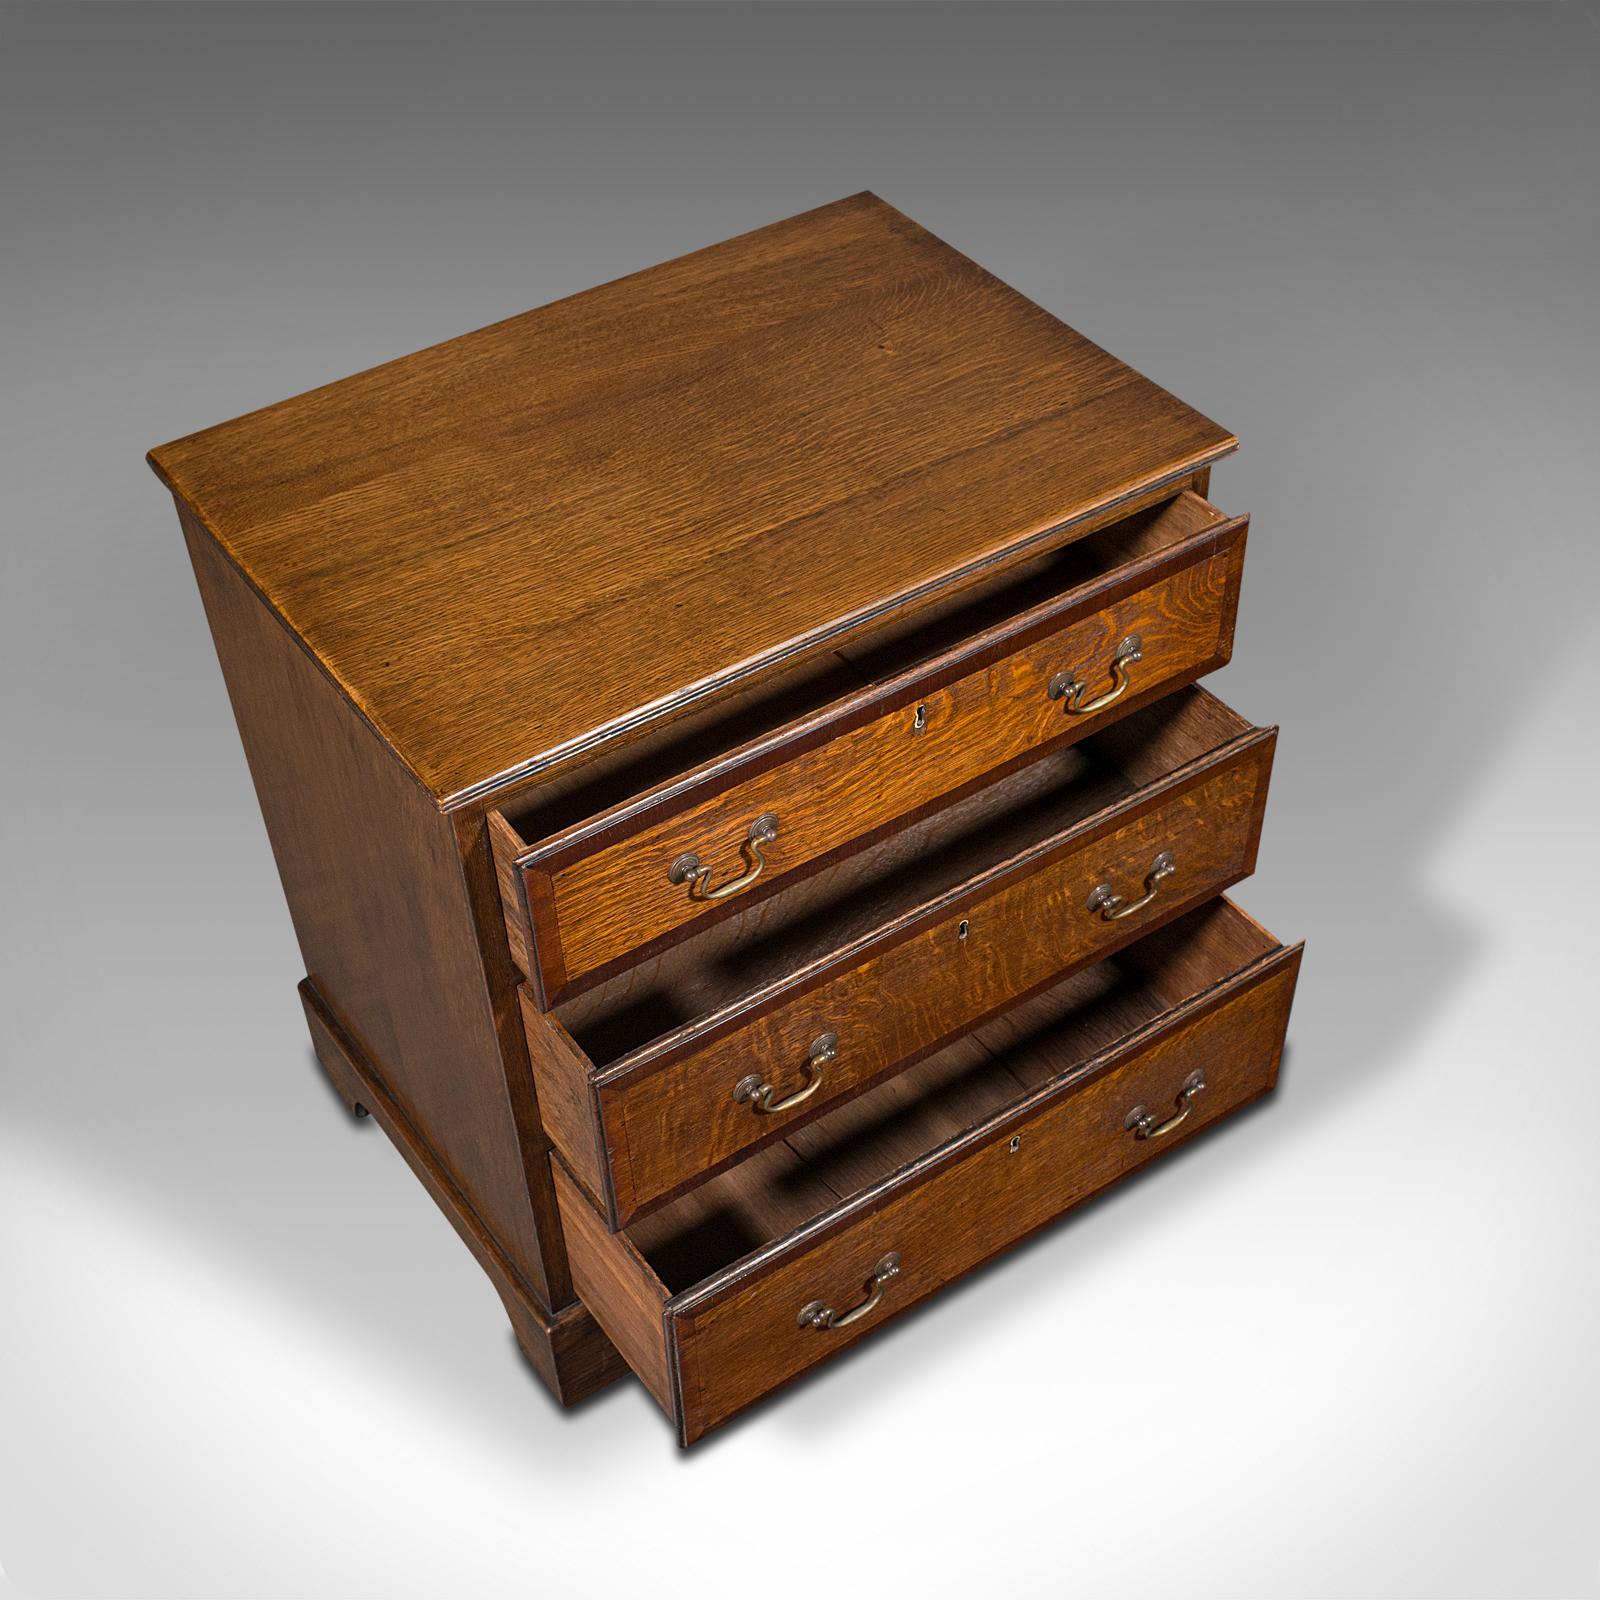 18th Century Antique Compact Chest of Drawers, English, Oak, Bedside Cabinet, Georgian, 1800 For Sale